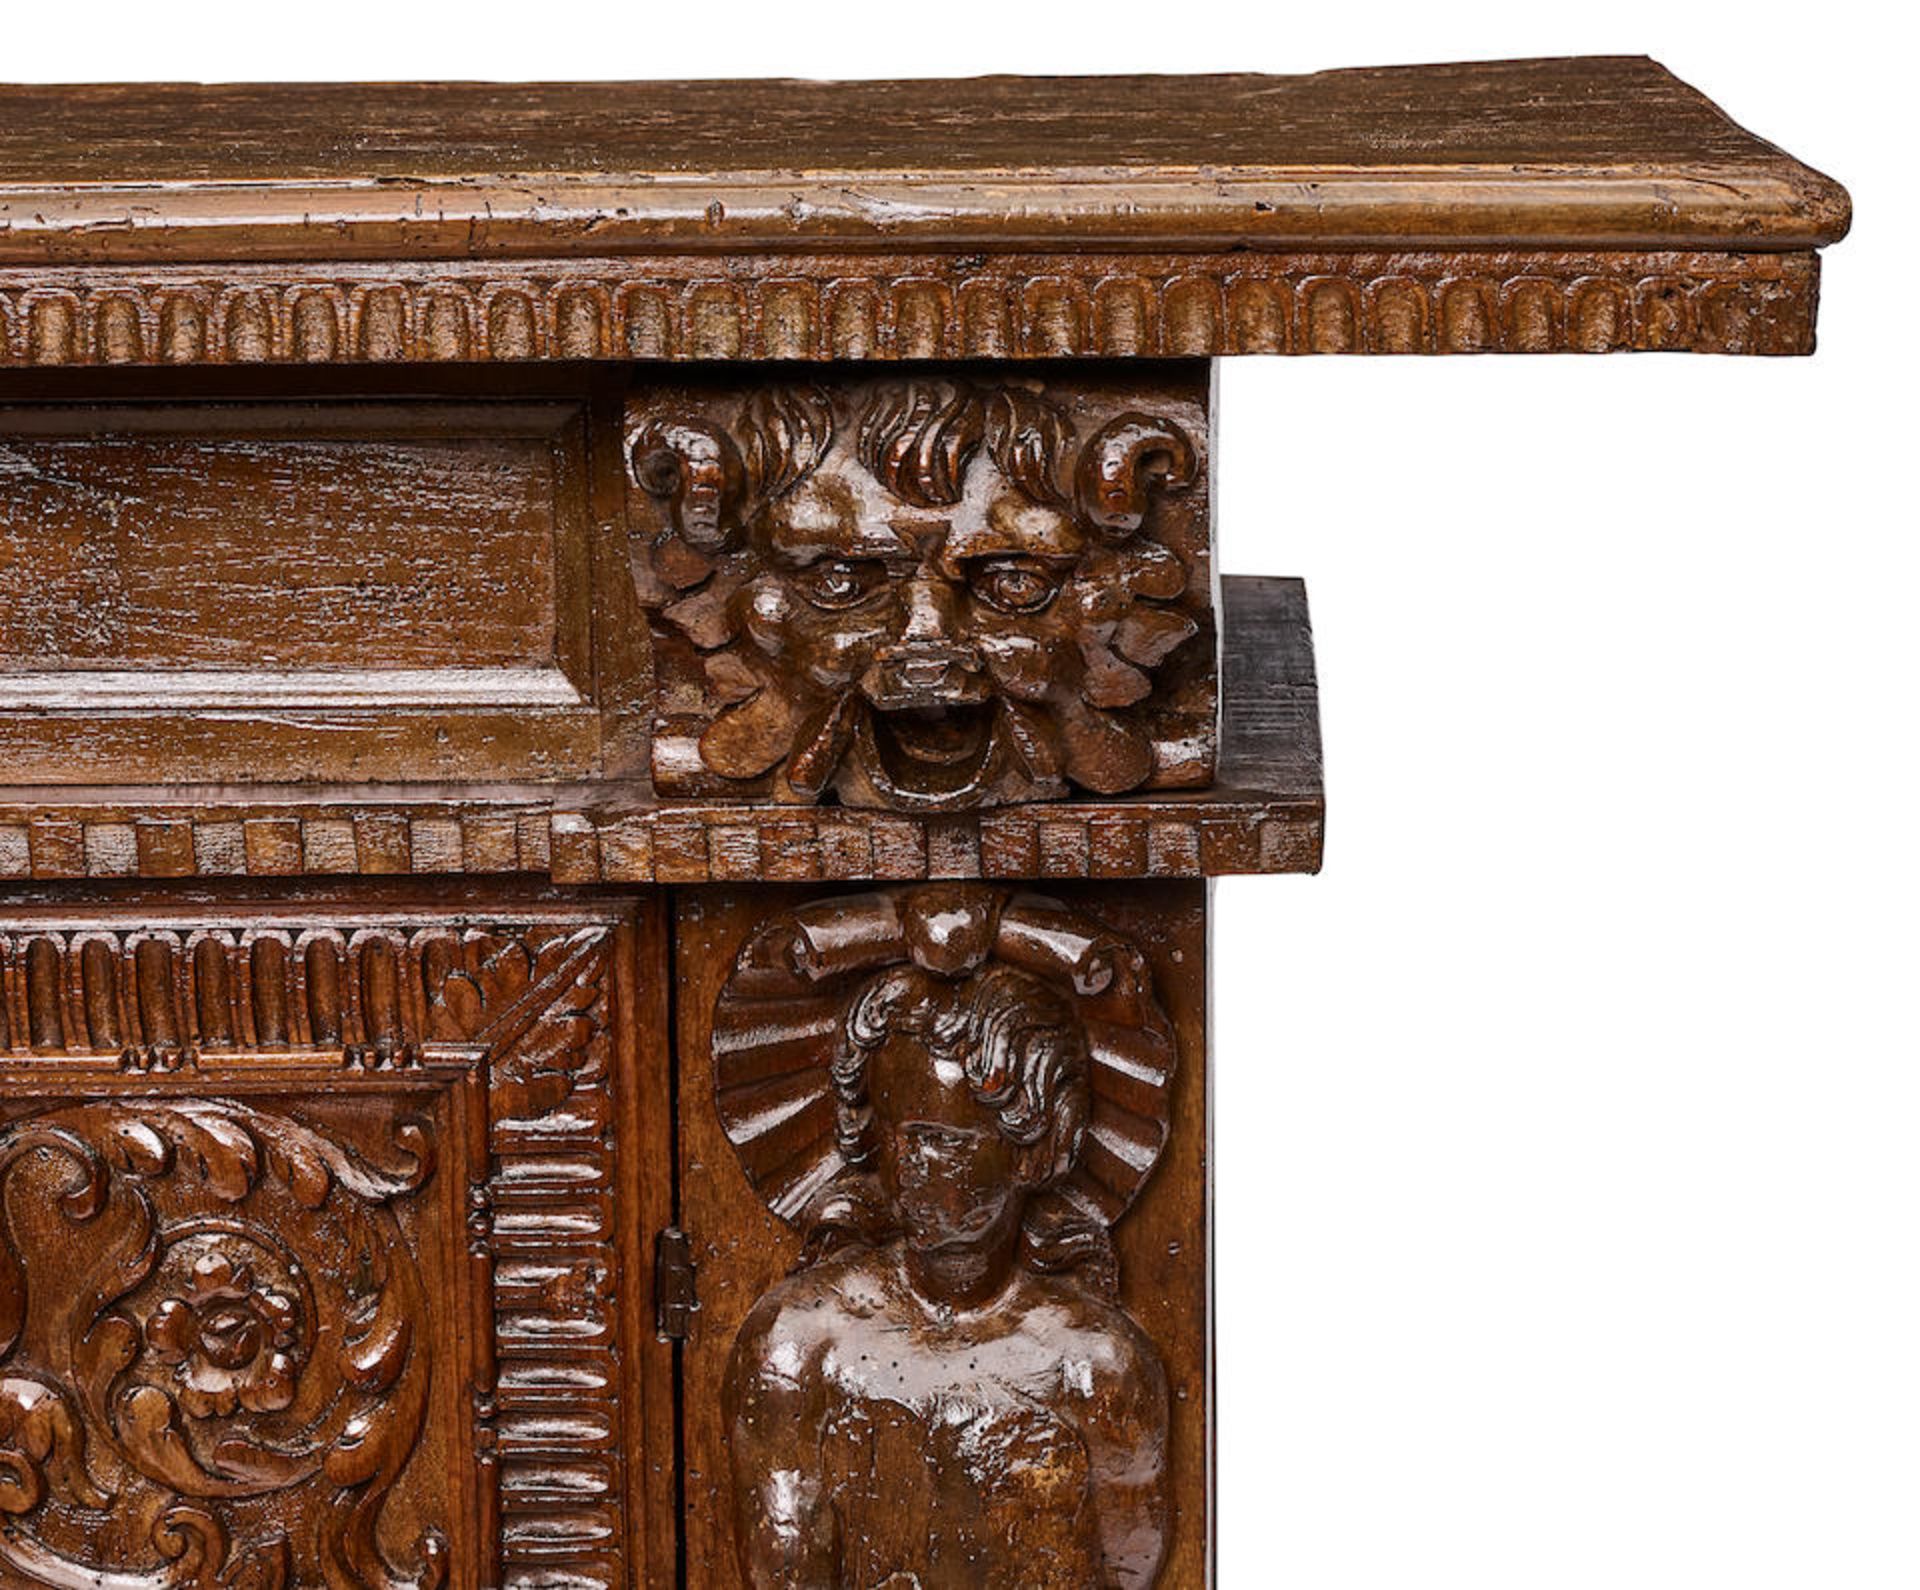 AN ITALIAN BAROQUE CARVED WALNUT CREDENZAEarly 17th century - Image 2 of 2